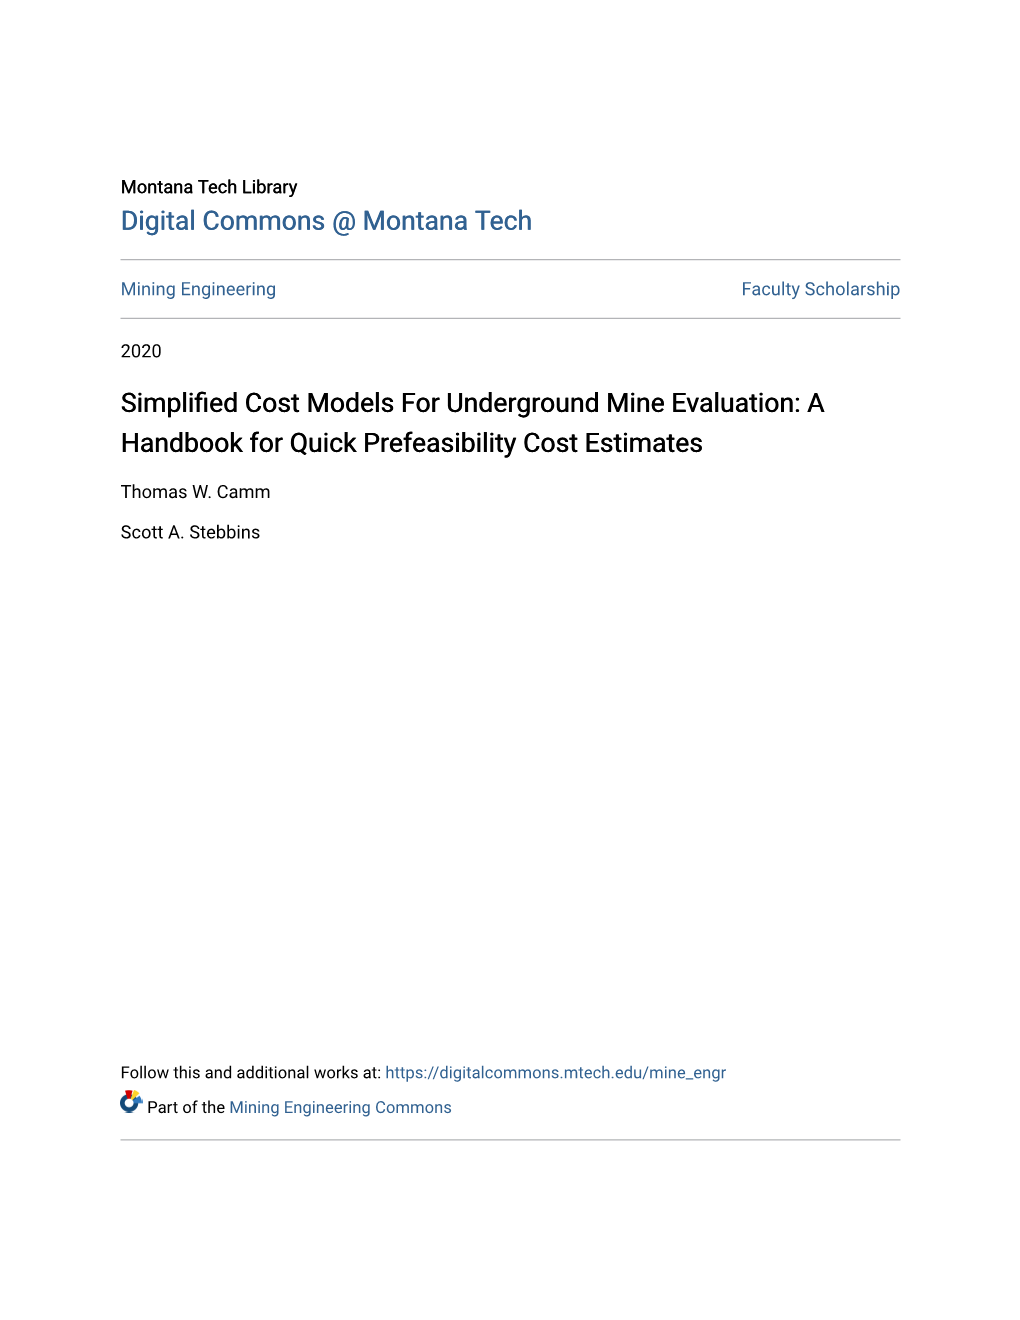 SIMPLIFIED COST MODELS for UNDERGROUND MINE EVALUATION a Handbook for Quick Prefeasibility Cost Estimates